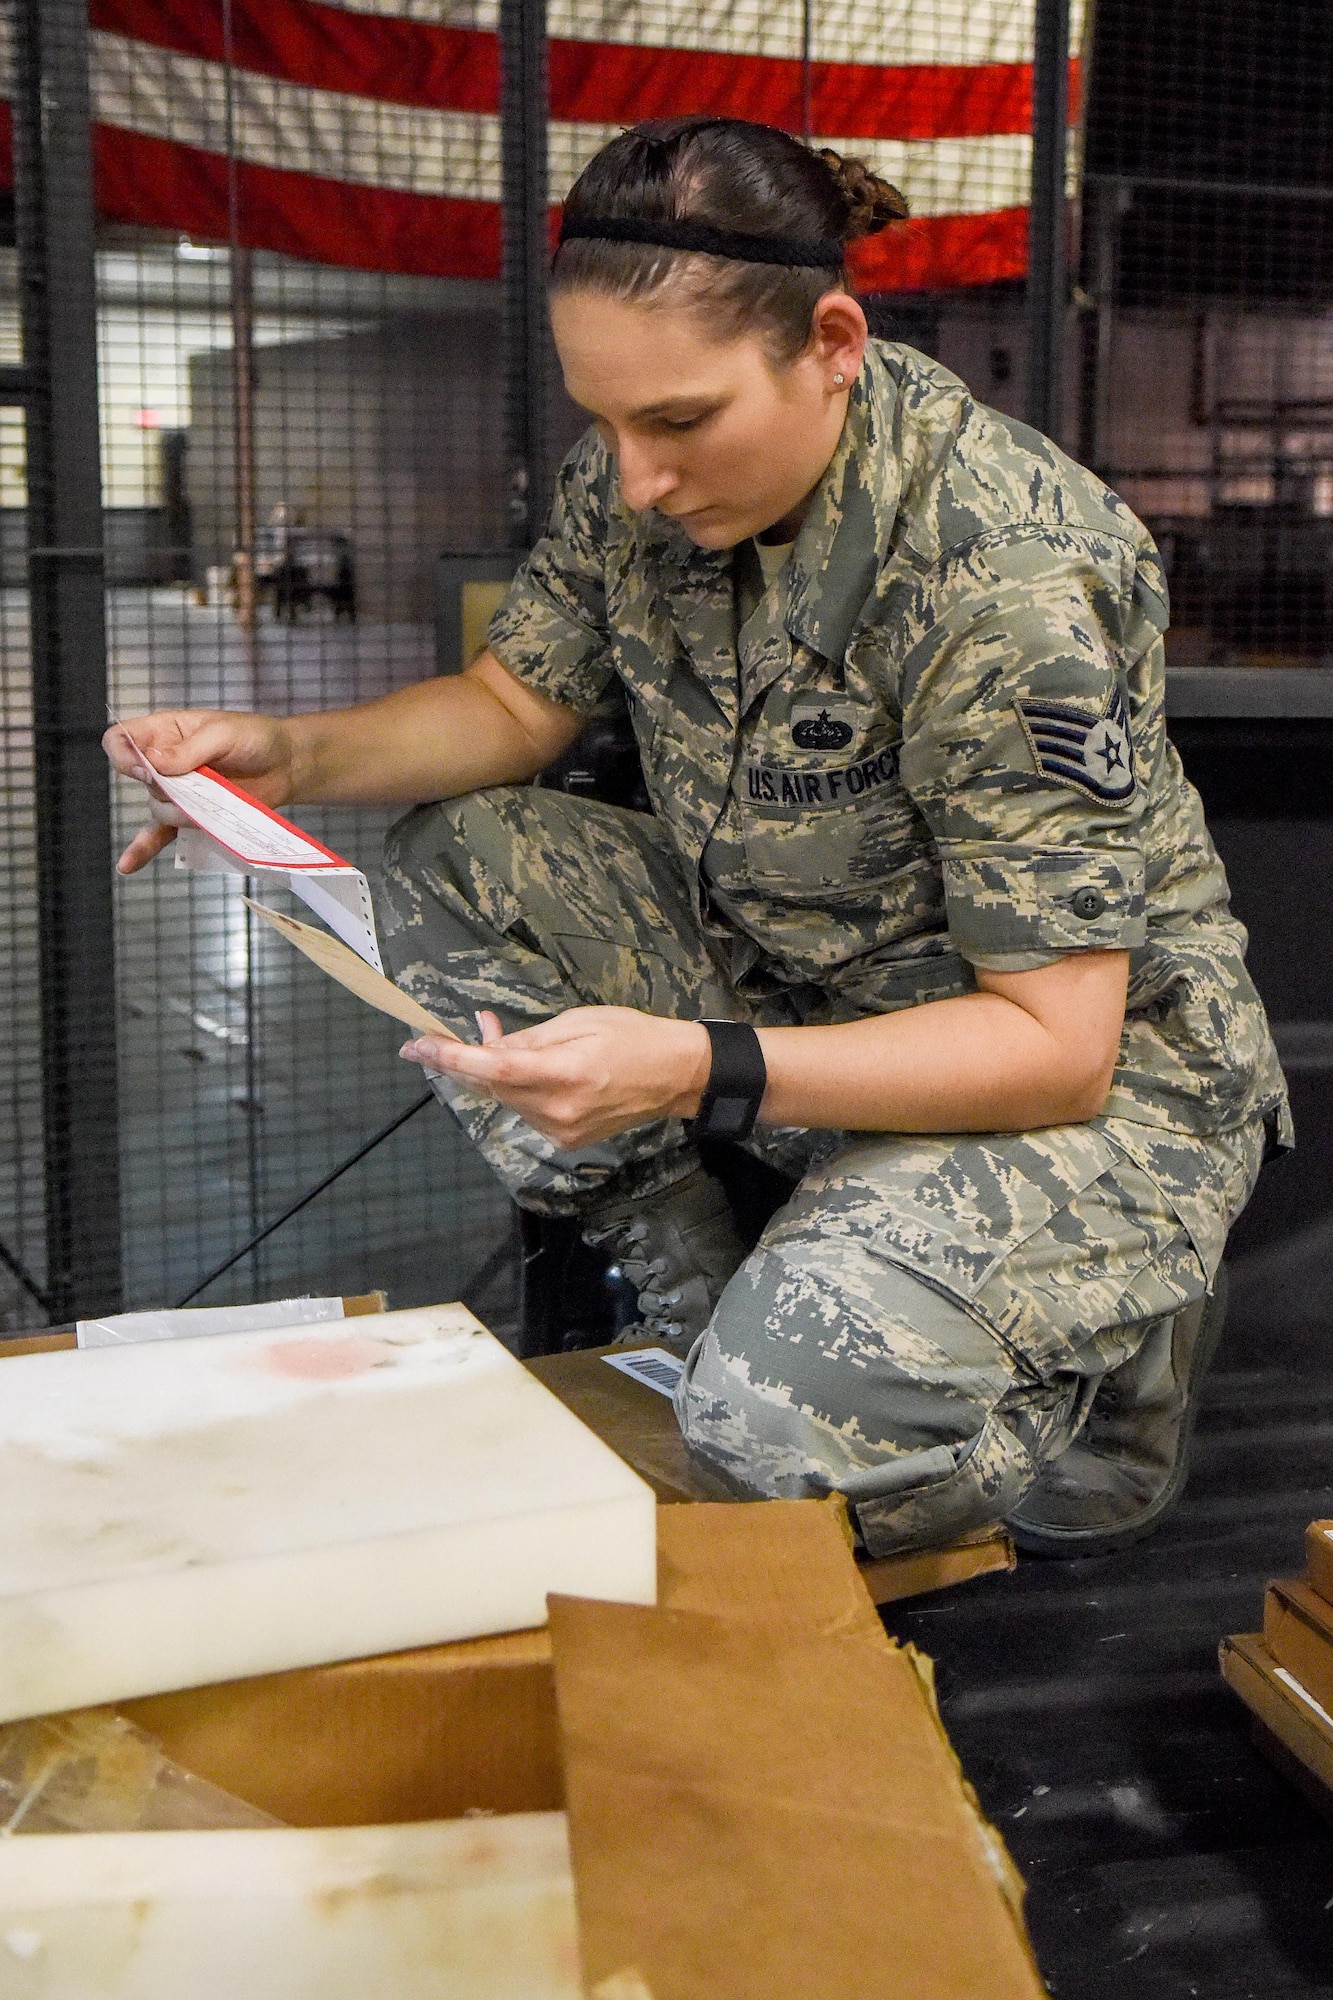 Staff Sgt. Kacey Murphey, 4th LRS assistant NCO in-charge of Centralized Repair Facility, checks in parts from a maintenance back shop, Aug. 3, 2016, at Seymour Johnson Air Force Base, North Carolina. The CRF is designed to save the Air Force money and manpower by having maintainers fix aircraft parts on station and house them in the CRF, where they are then cataloged and made available through the Execution and Prioritization of Repair Support System for other bases to order from and have sent to their base. (U.S. Air Force photo by Airman Shawna L. Keyes)